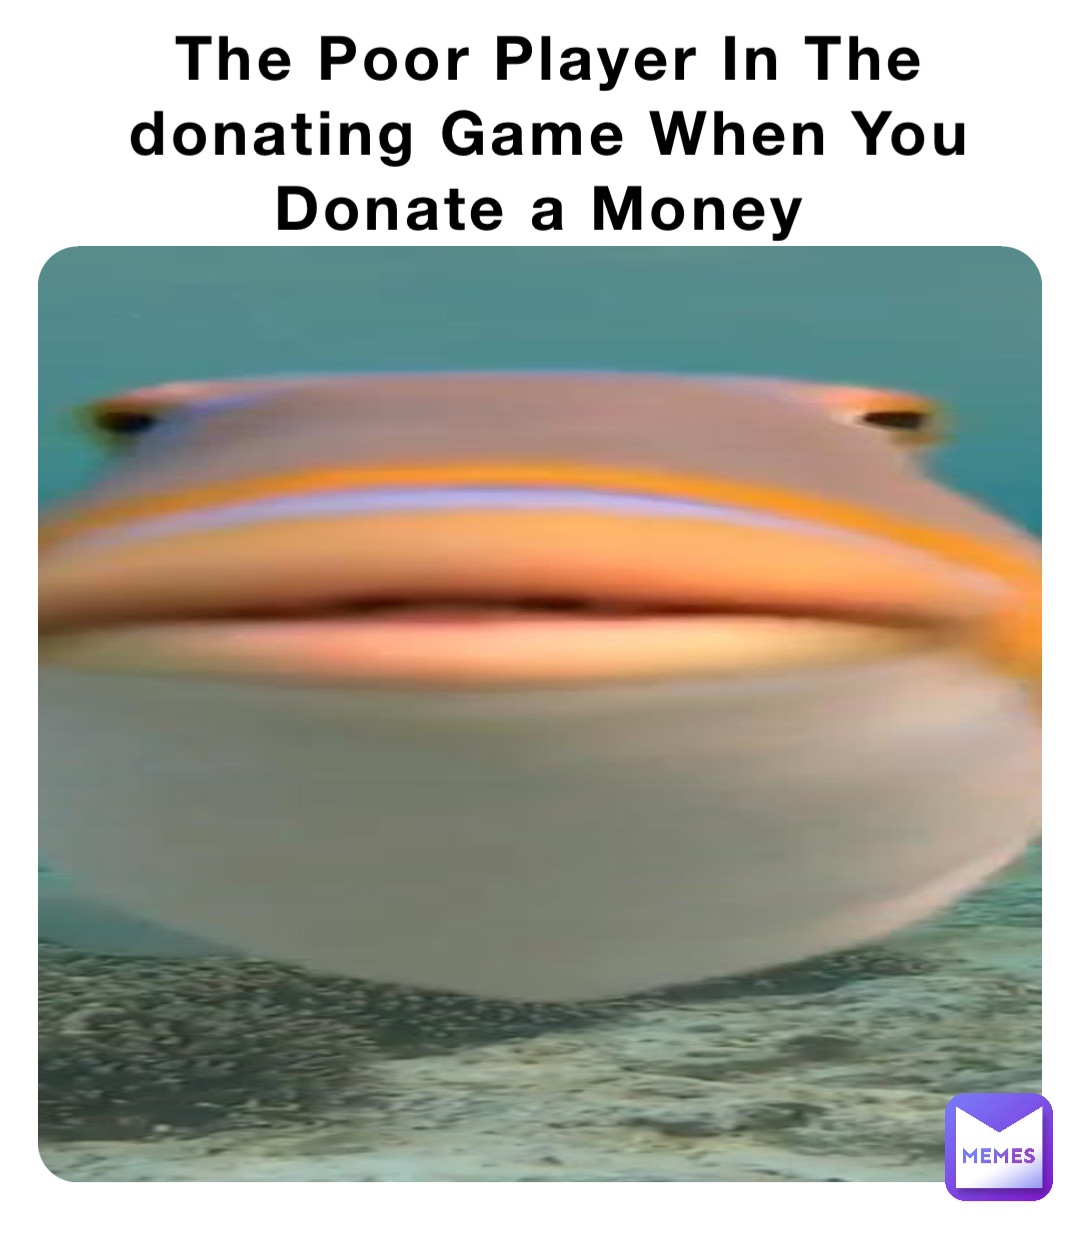 The Poor Player In The donating Game When You Donate a Money